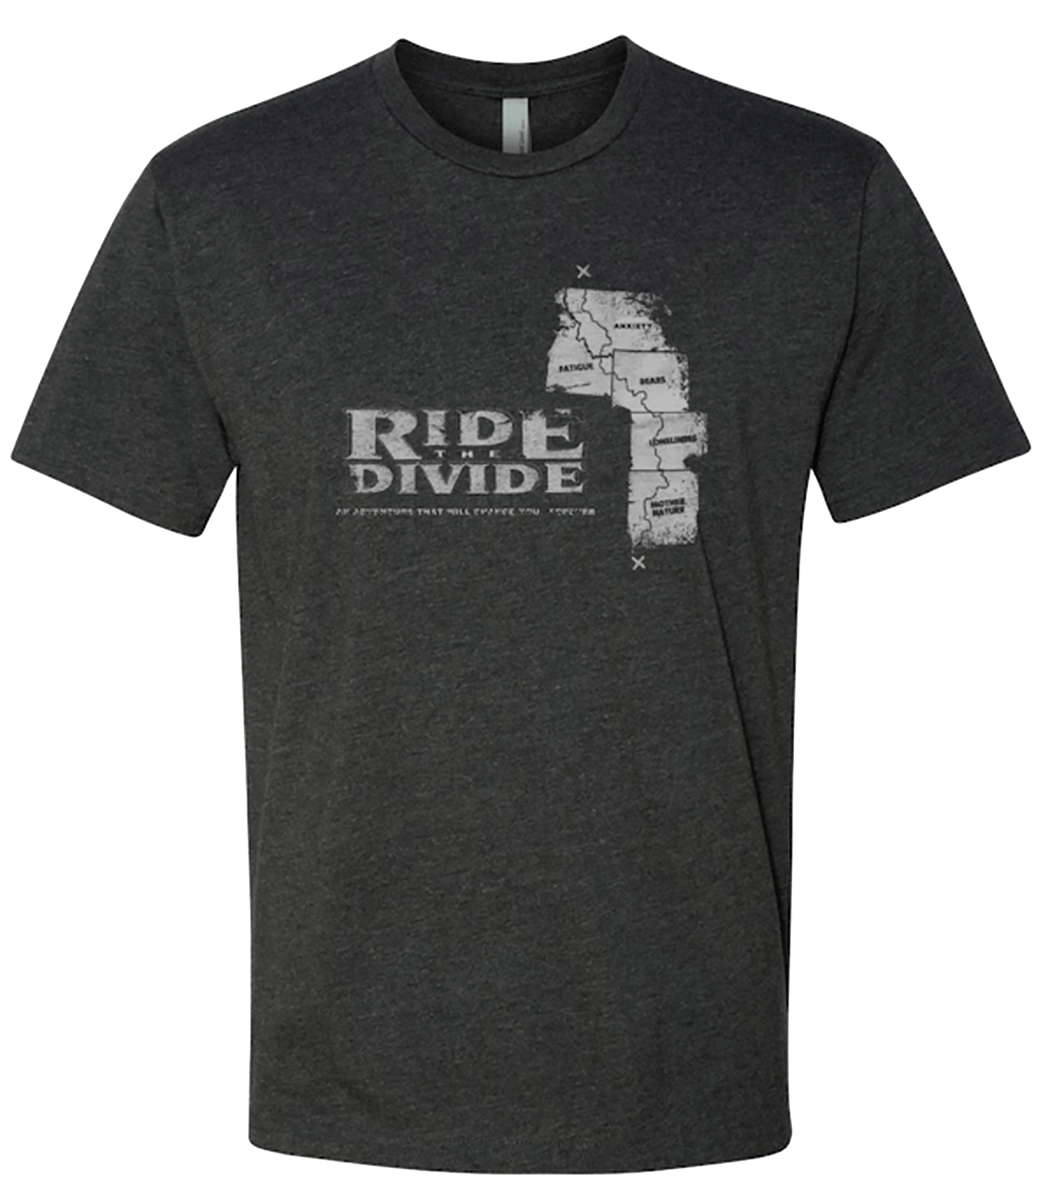 Ride the Divide T-shirt